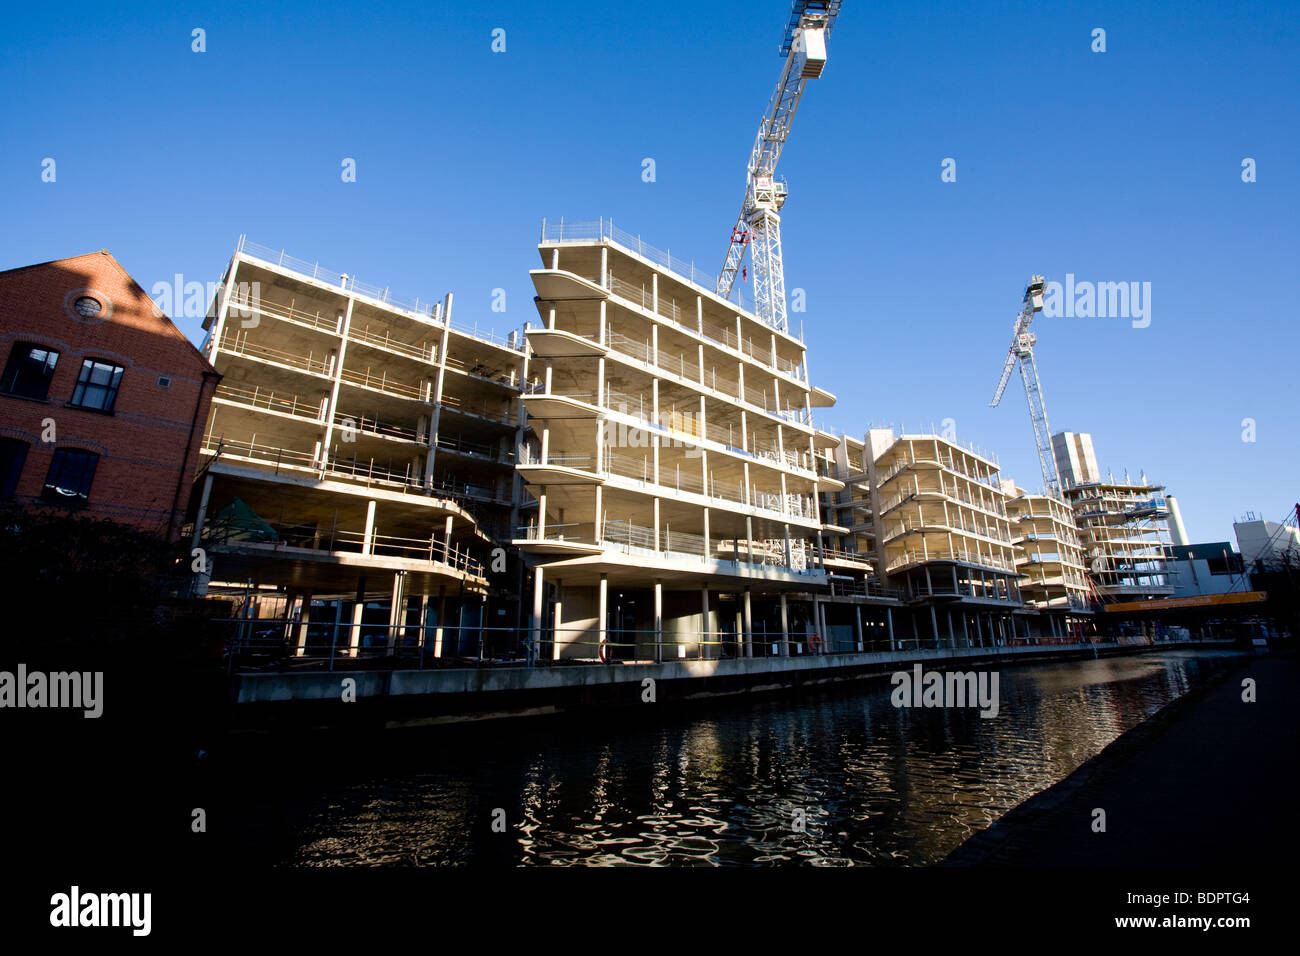 A canal side redevelopment and construction project in Nottingham, England. Stock Photo